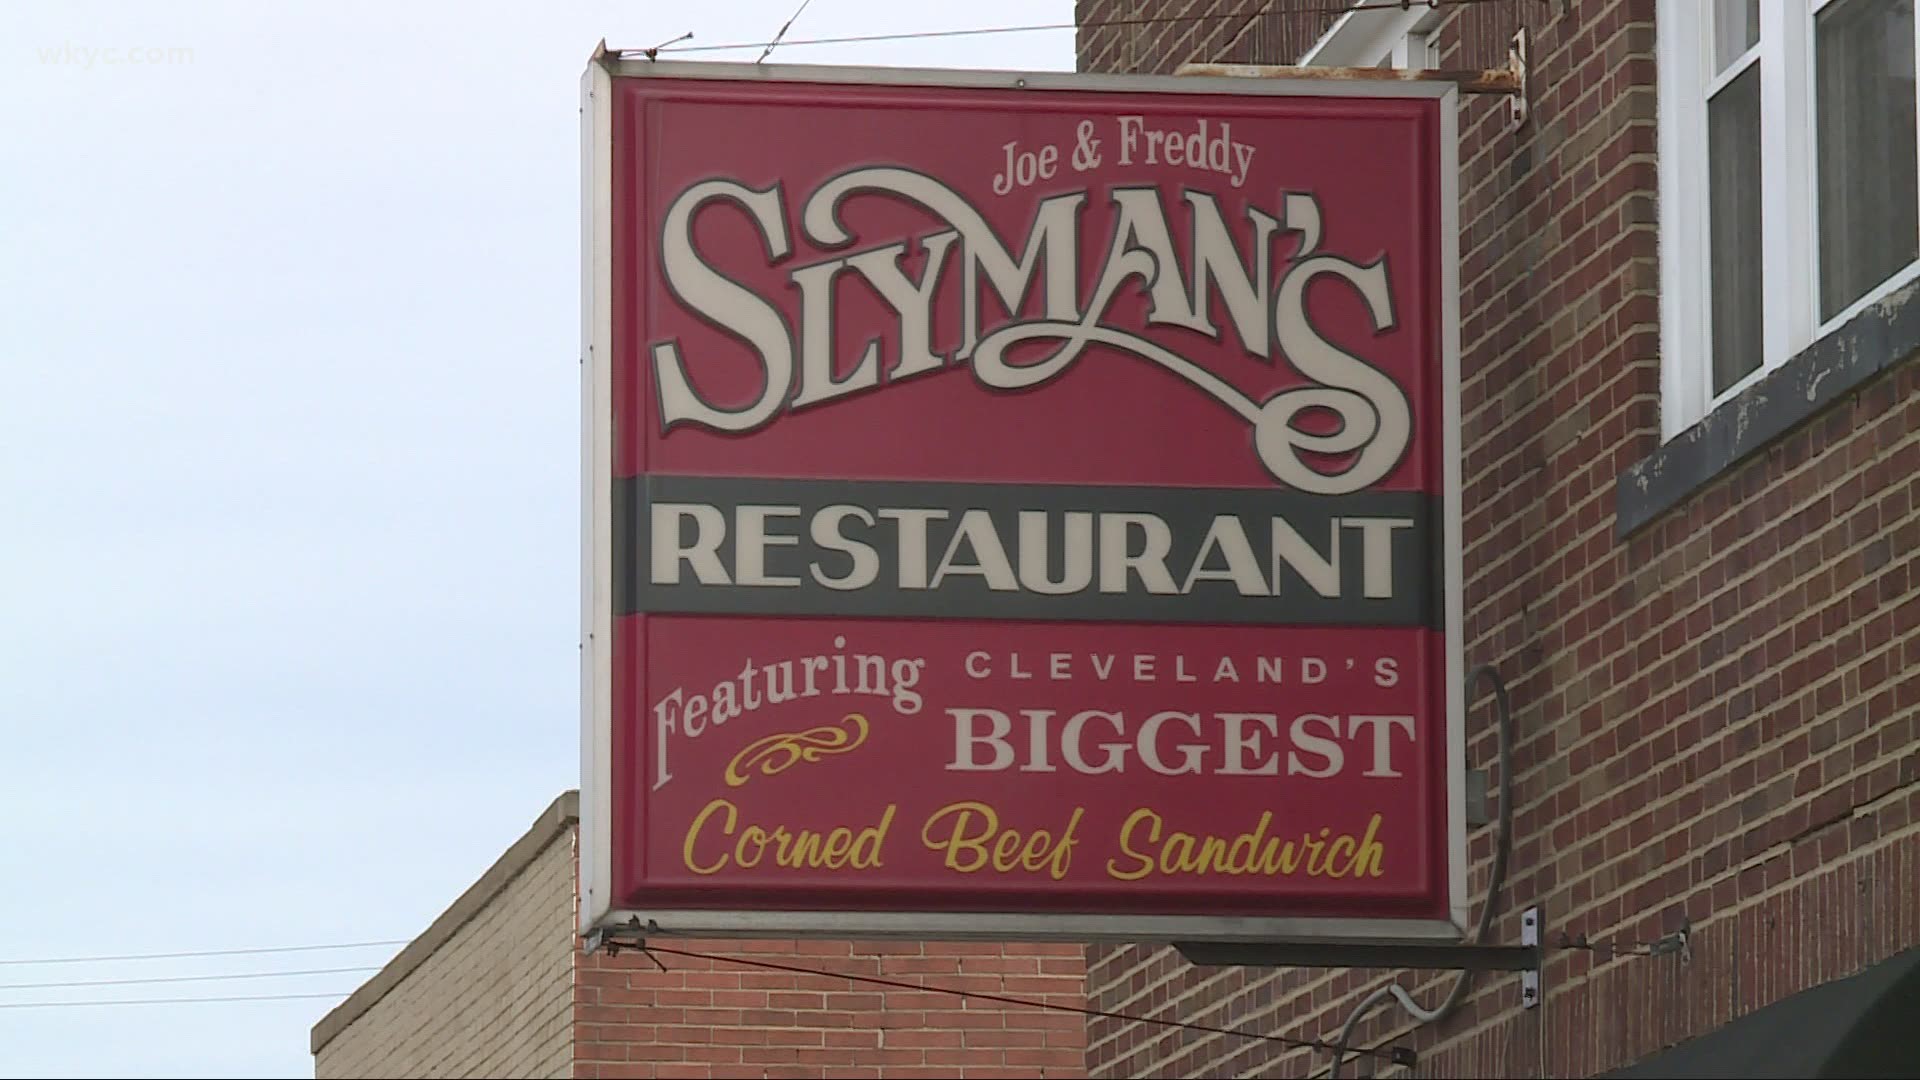 Slyman passed away on Tuesday night at the age of 83. His legacy will live on through his iconic Northeast Ohio restaurant, forever.